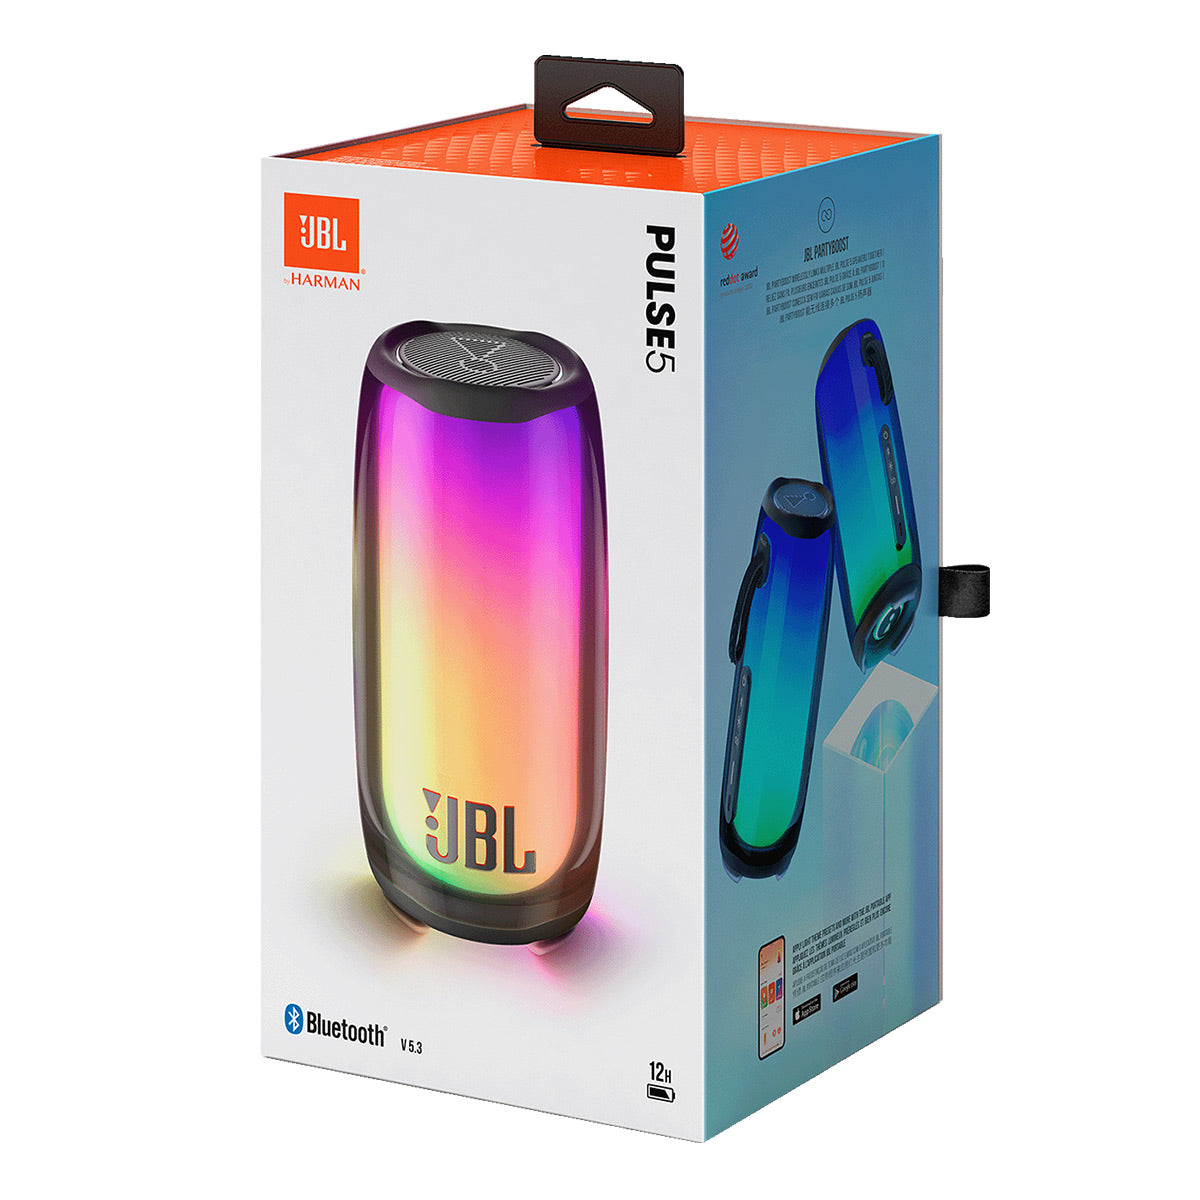  JBL Charge 5 Portable Wireless Bluetooth Speaker with IP67  Waterproof and USB Charge Out - Black, small : Electronics